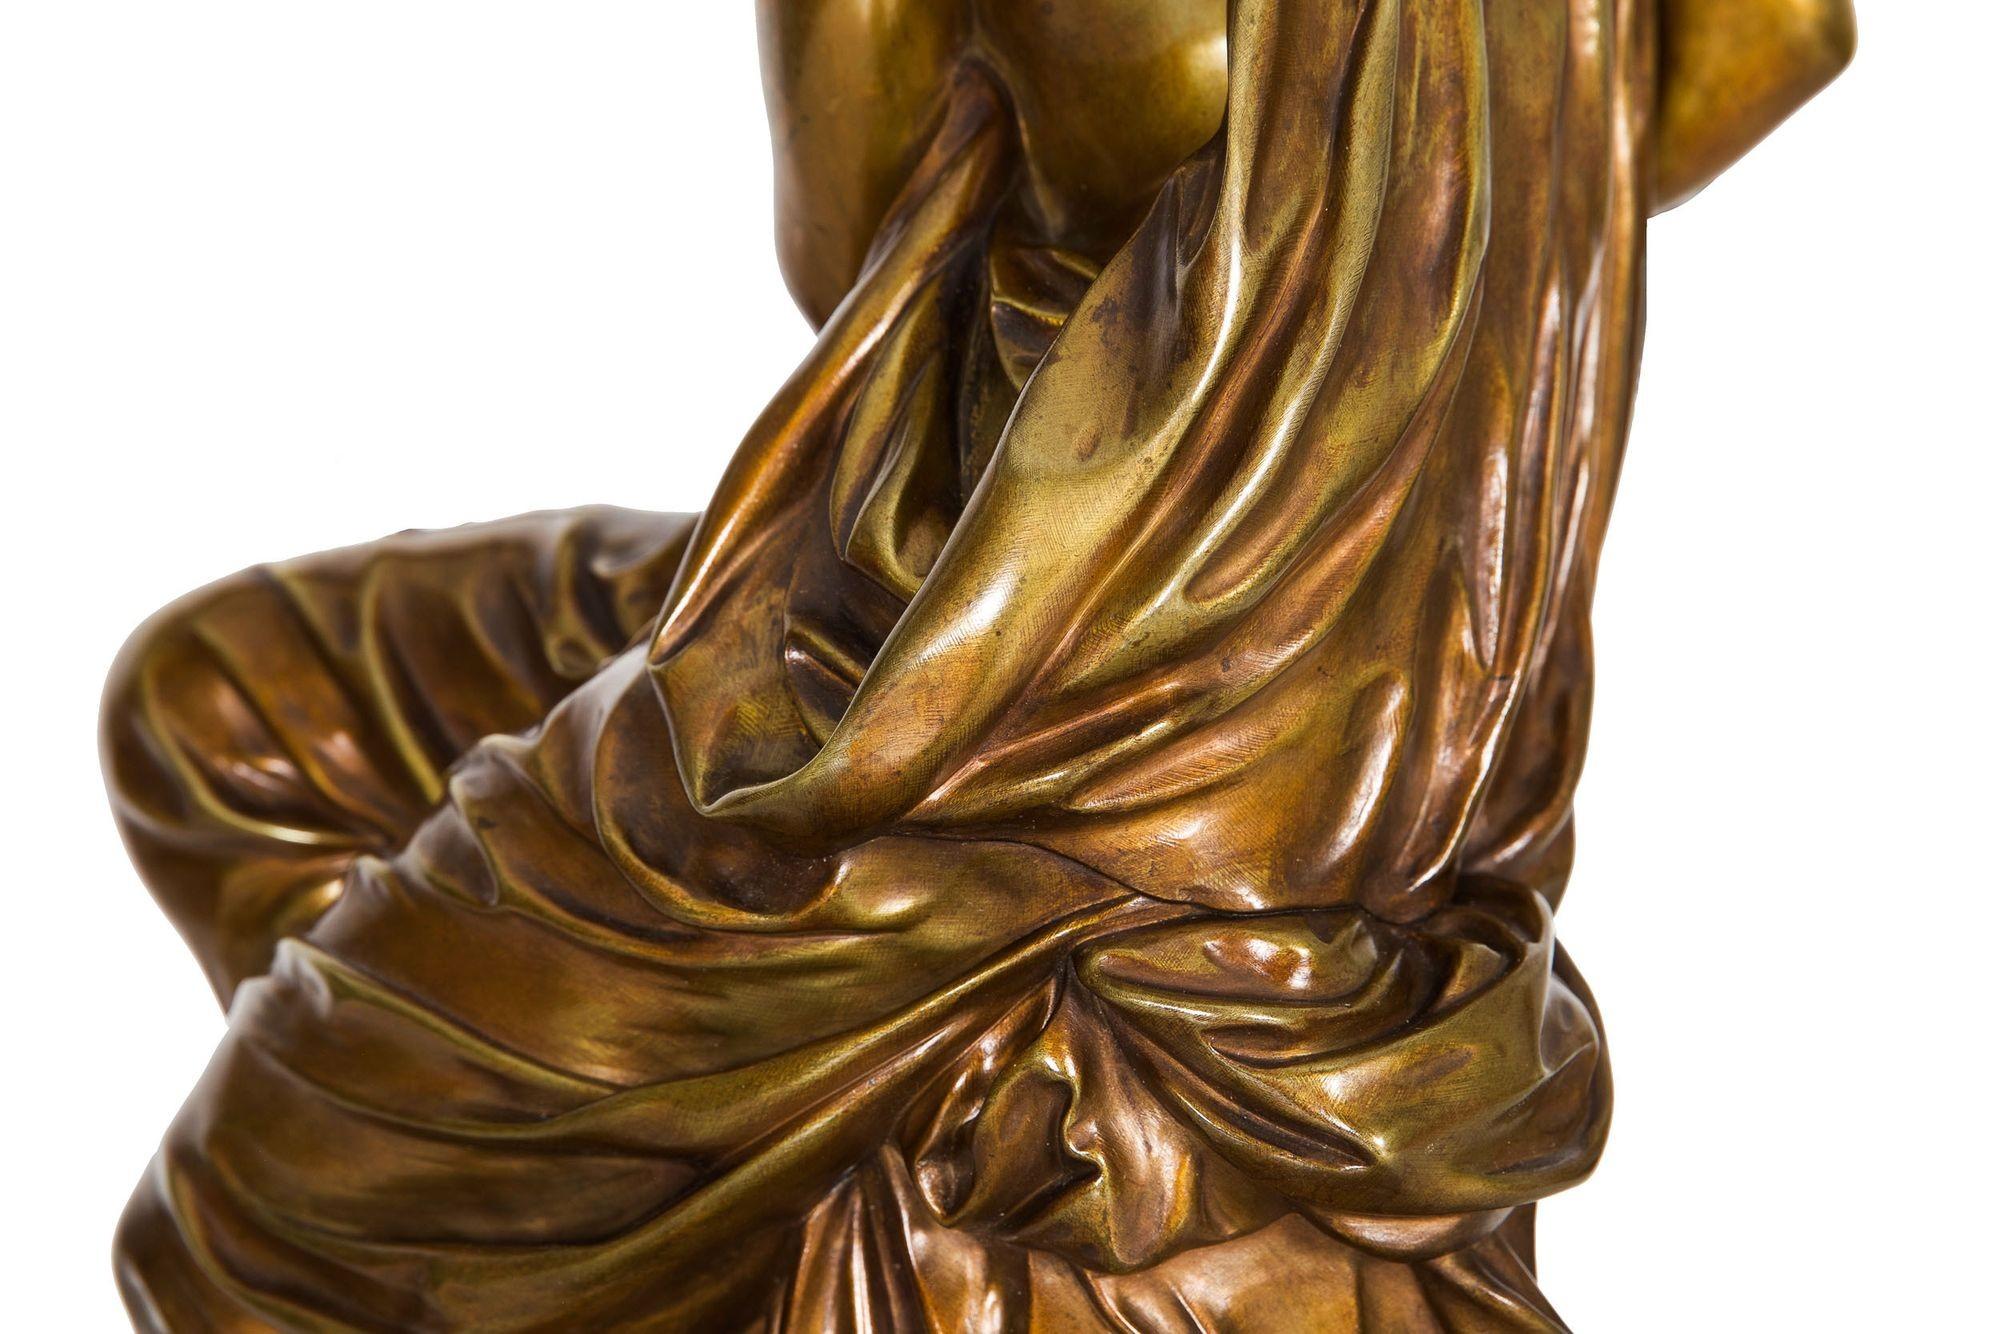 French Antique Bronze Sculpture “Seated Woman” by Etienne-Henri Dumaige, c.1880 For Sale 13